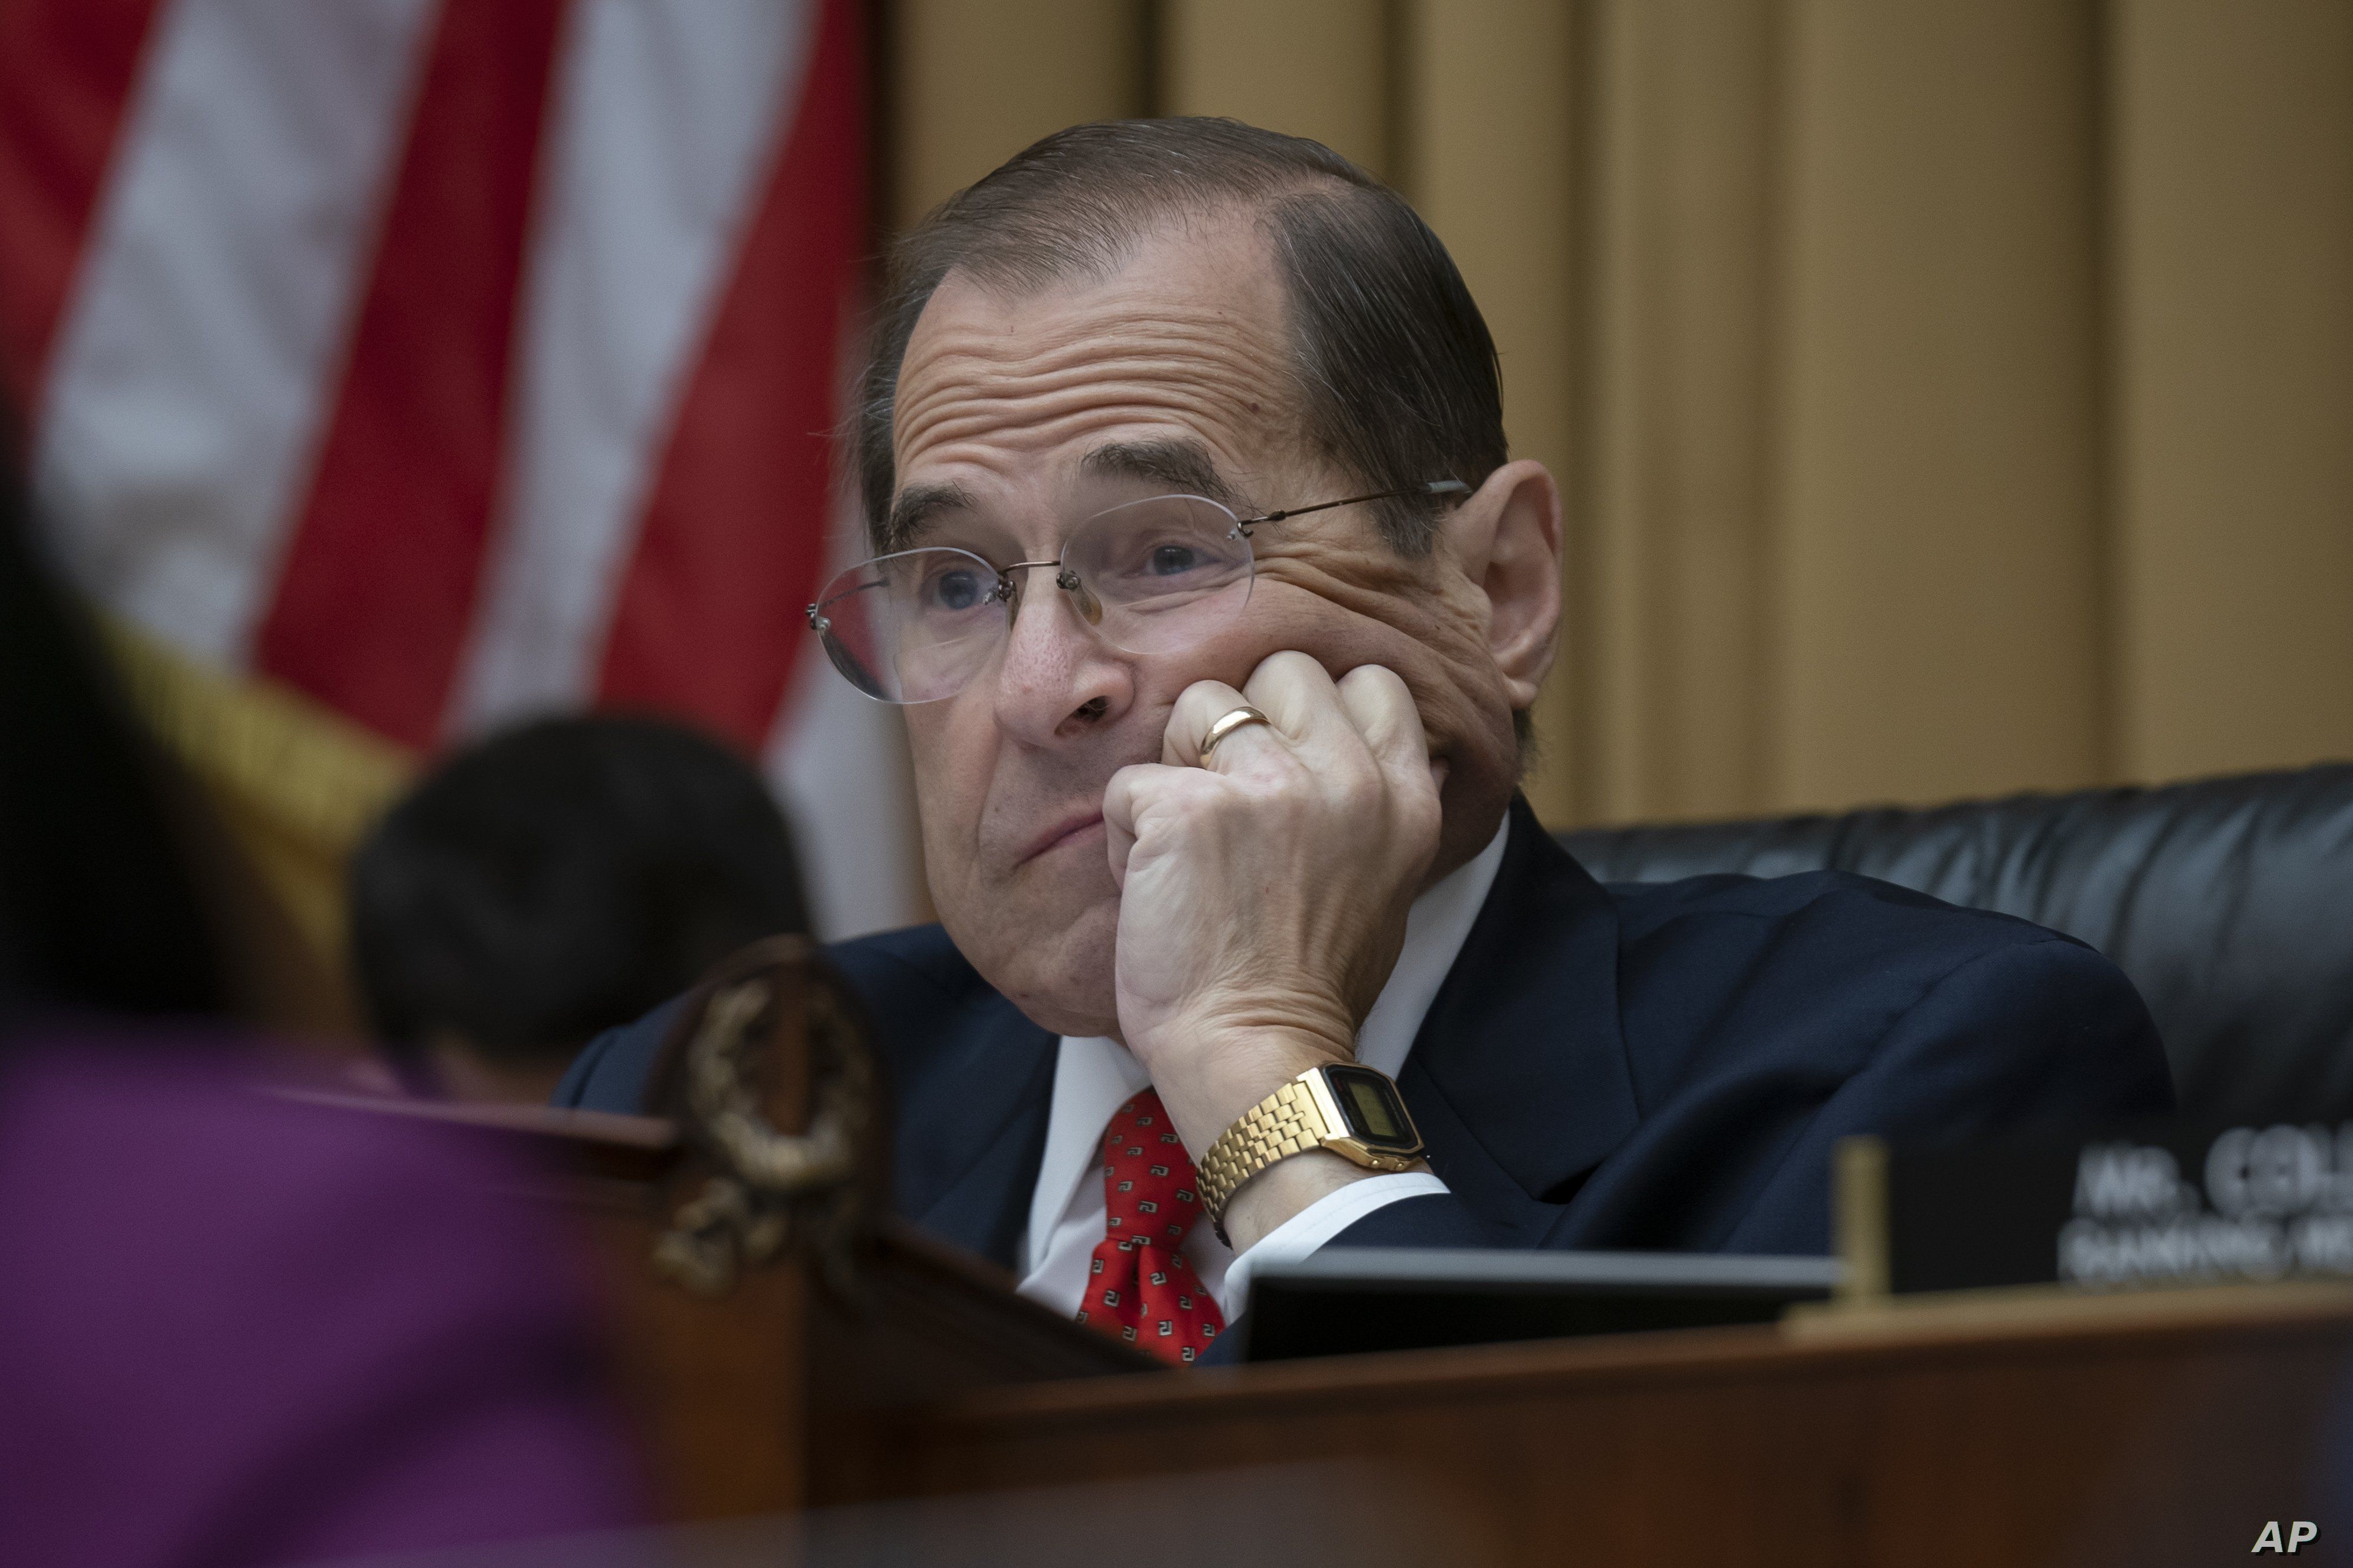 House Judiciary Committee Chair Jerrold Nadler, D-N.Y., listens as former special counsel Robert Mueller testifies about his investigation into President Donald Trump and Russian interference in the 2016 election, on Capitol Hill, July 24, 2019.